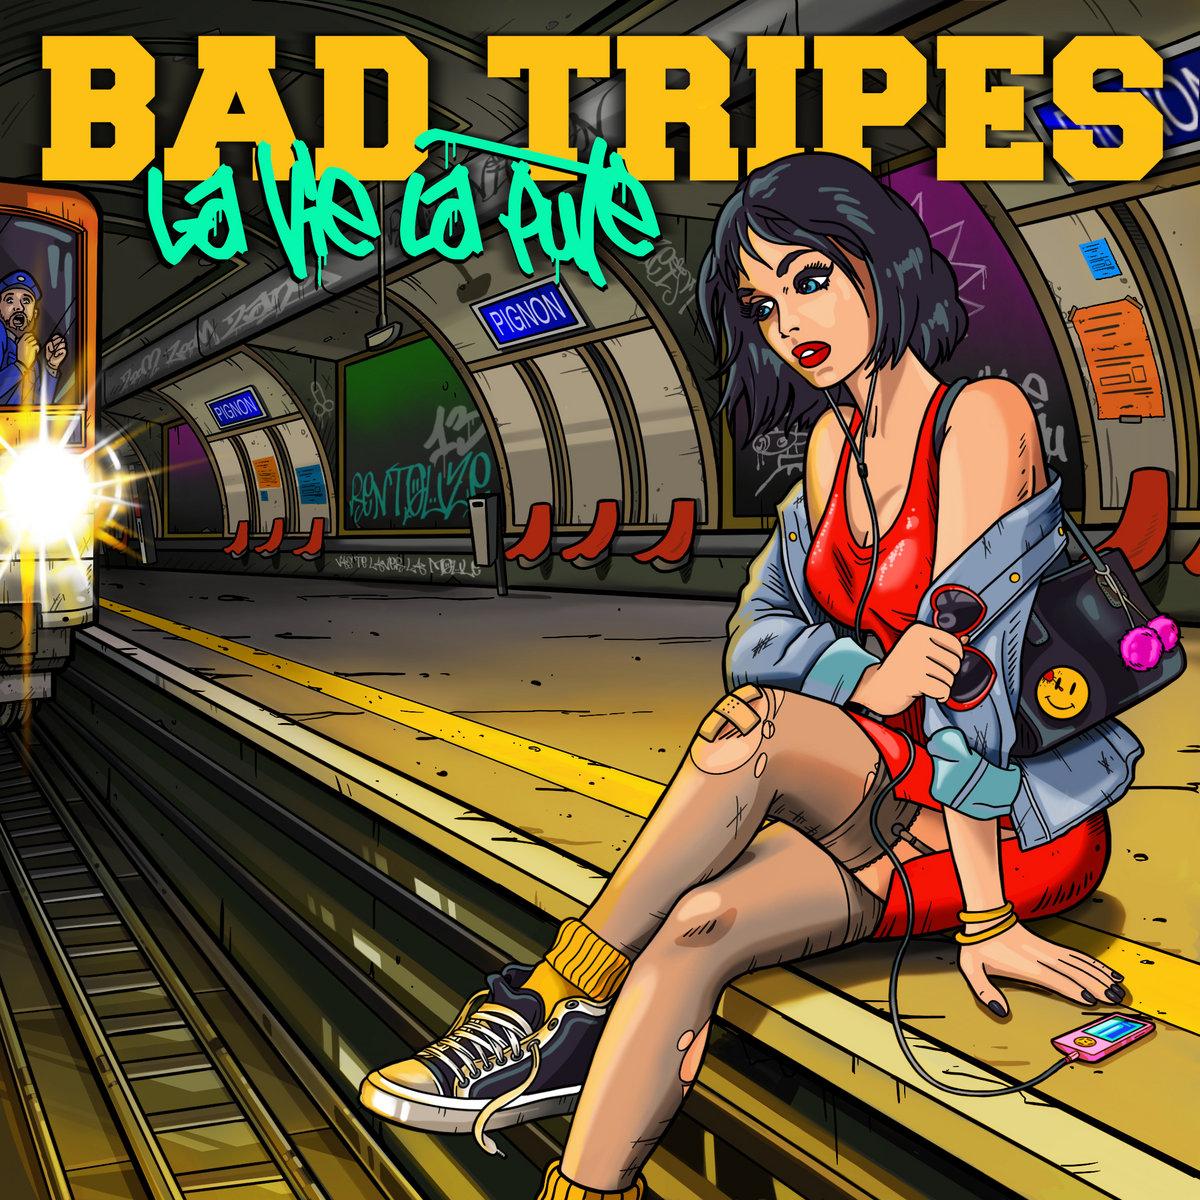 Bad tripes cover